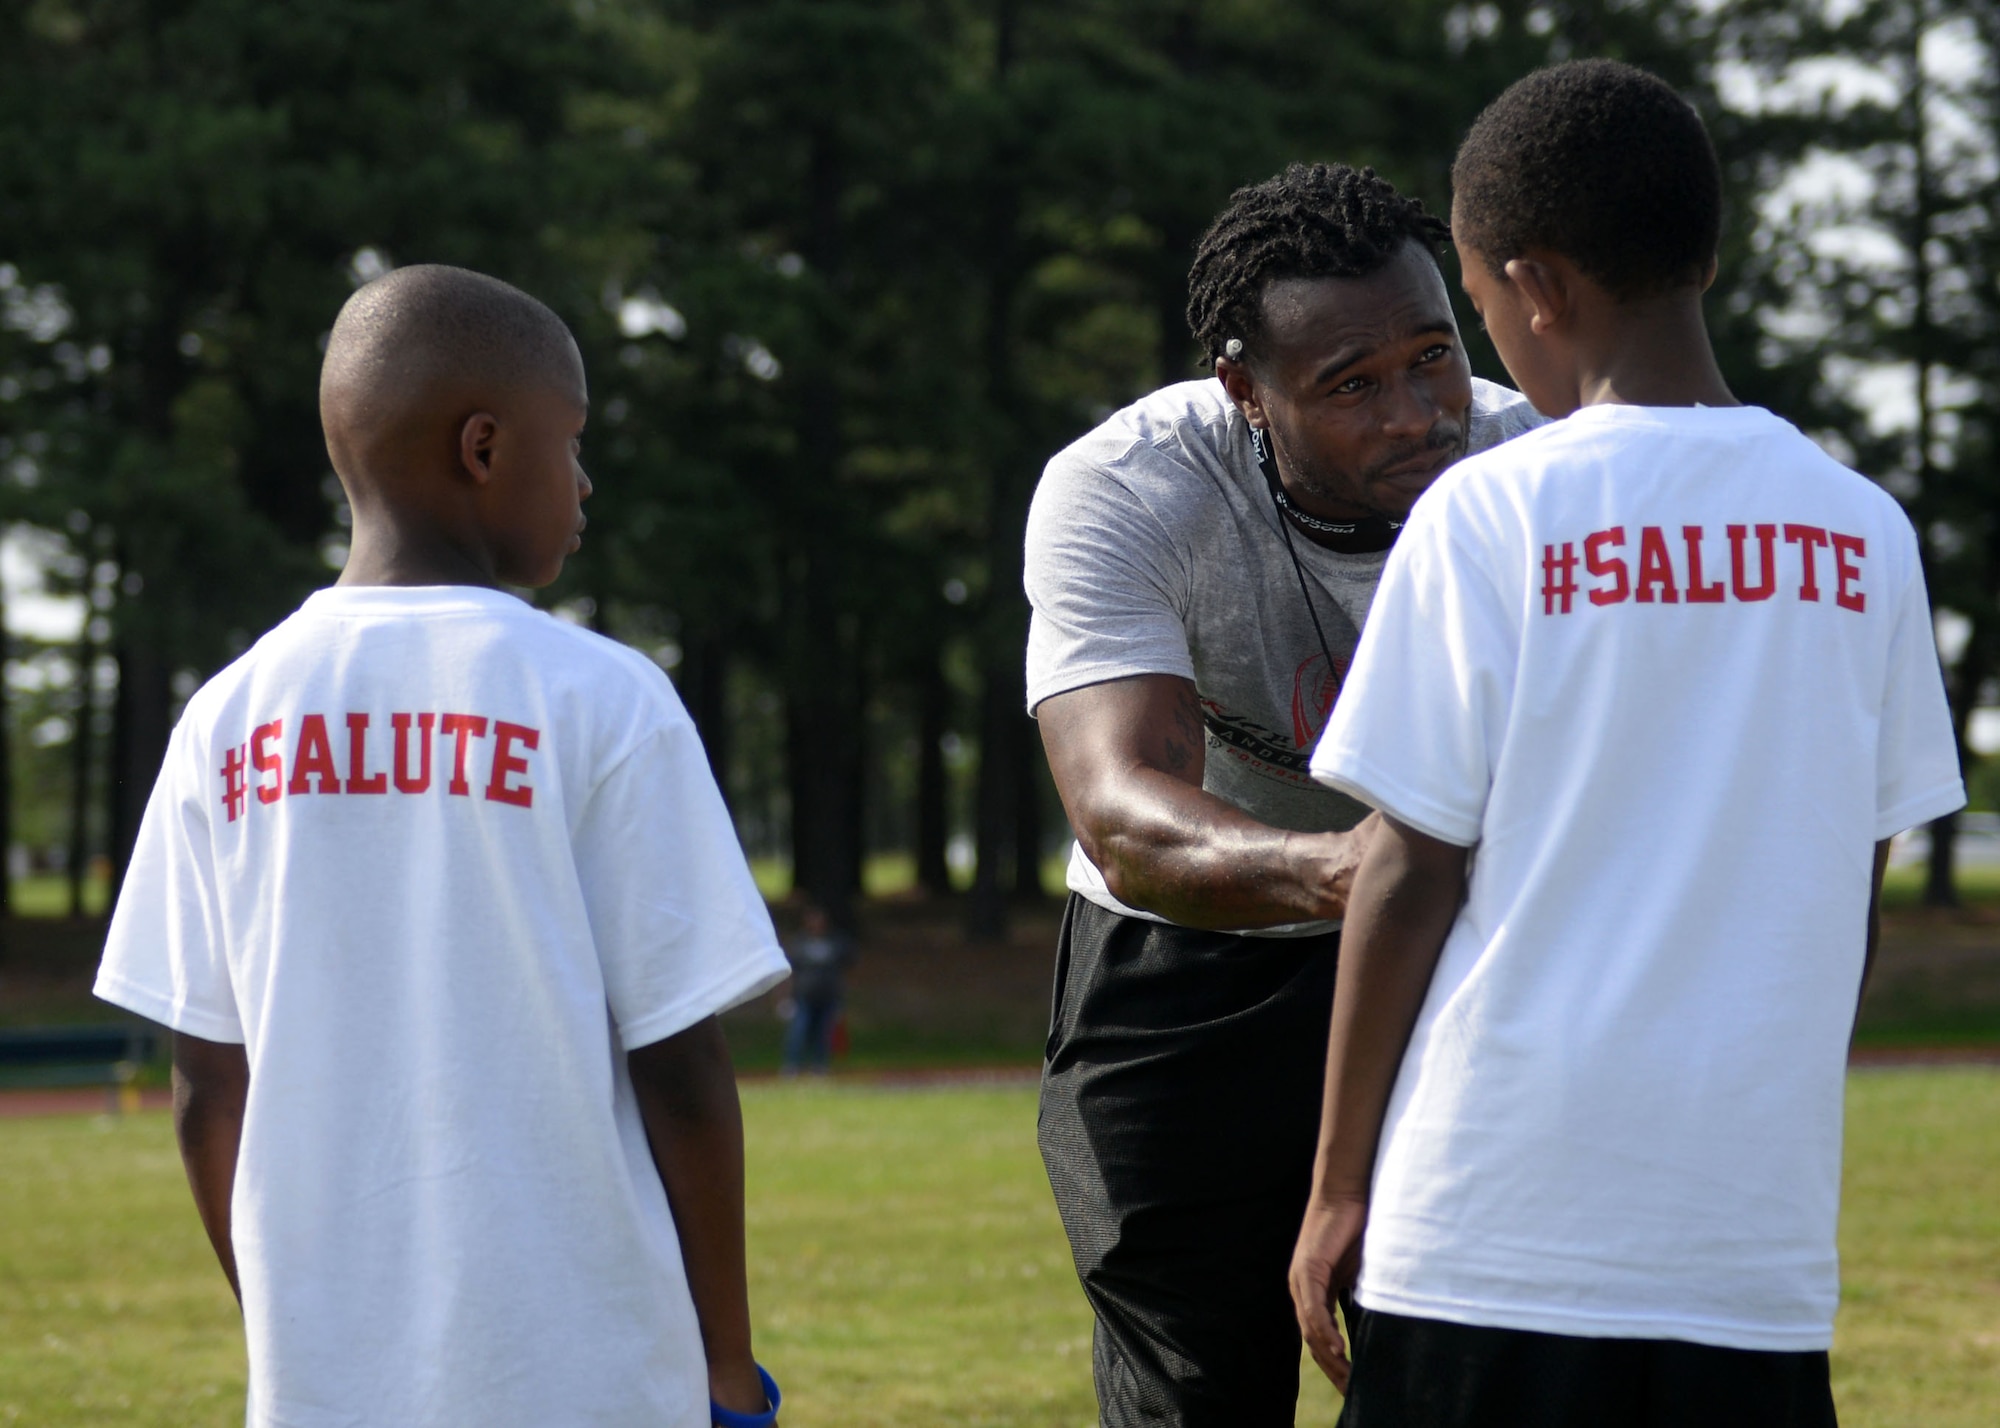 A volunteer at the Proctor & Gamble Andre Roberts Football ProCamp teaches military children different football drills June 16, 2017, at Little Rock Air Force Base, Arkansas. Children who attended the camp had the opportunity to learn different football skills from Andres Roberts, an Atlanta Falcons wide receiver and former military child. (U.S. Air Force photo by Airman 1st Class Codie Collins)